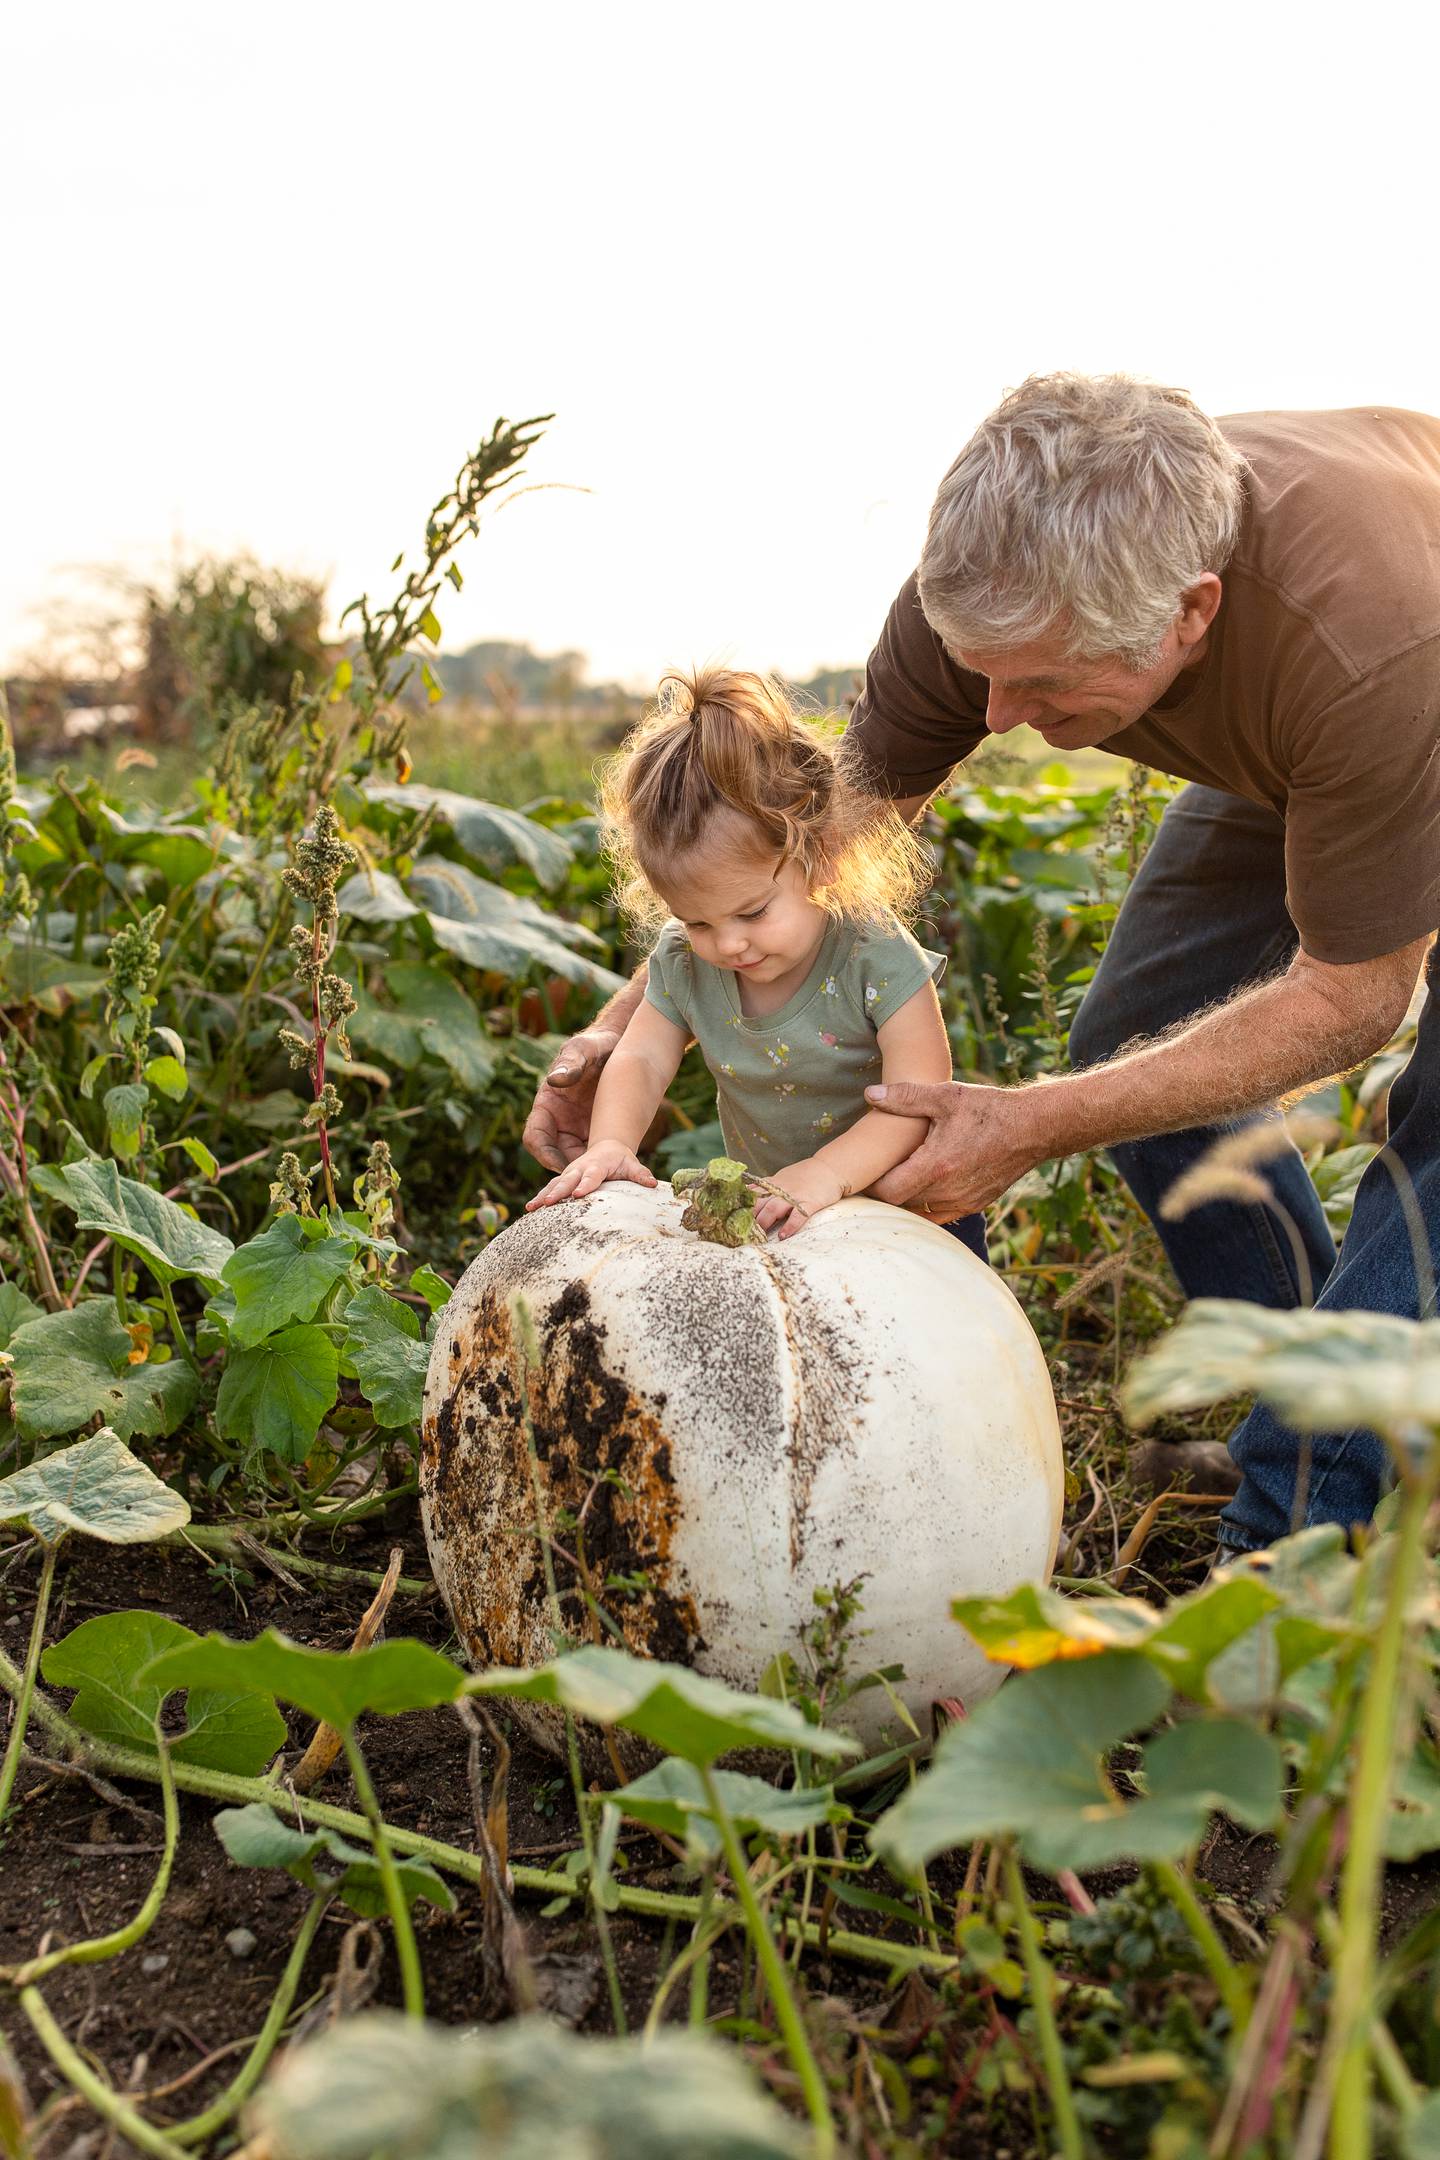 A young girl picks a white pumpkin. The photographer, April Lamb, won second place in the inaugural 2023 INFB Photo Contest.